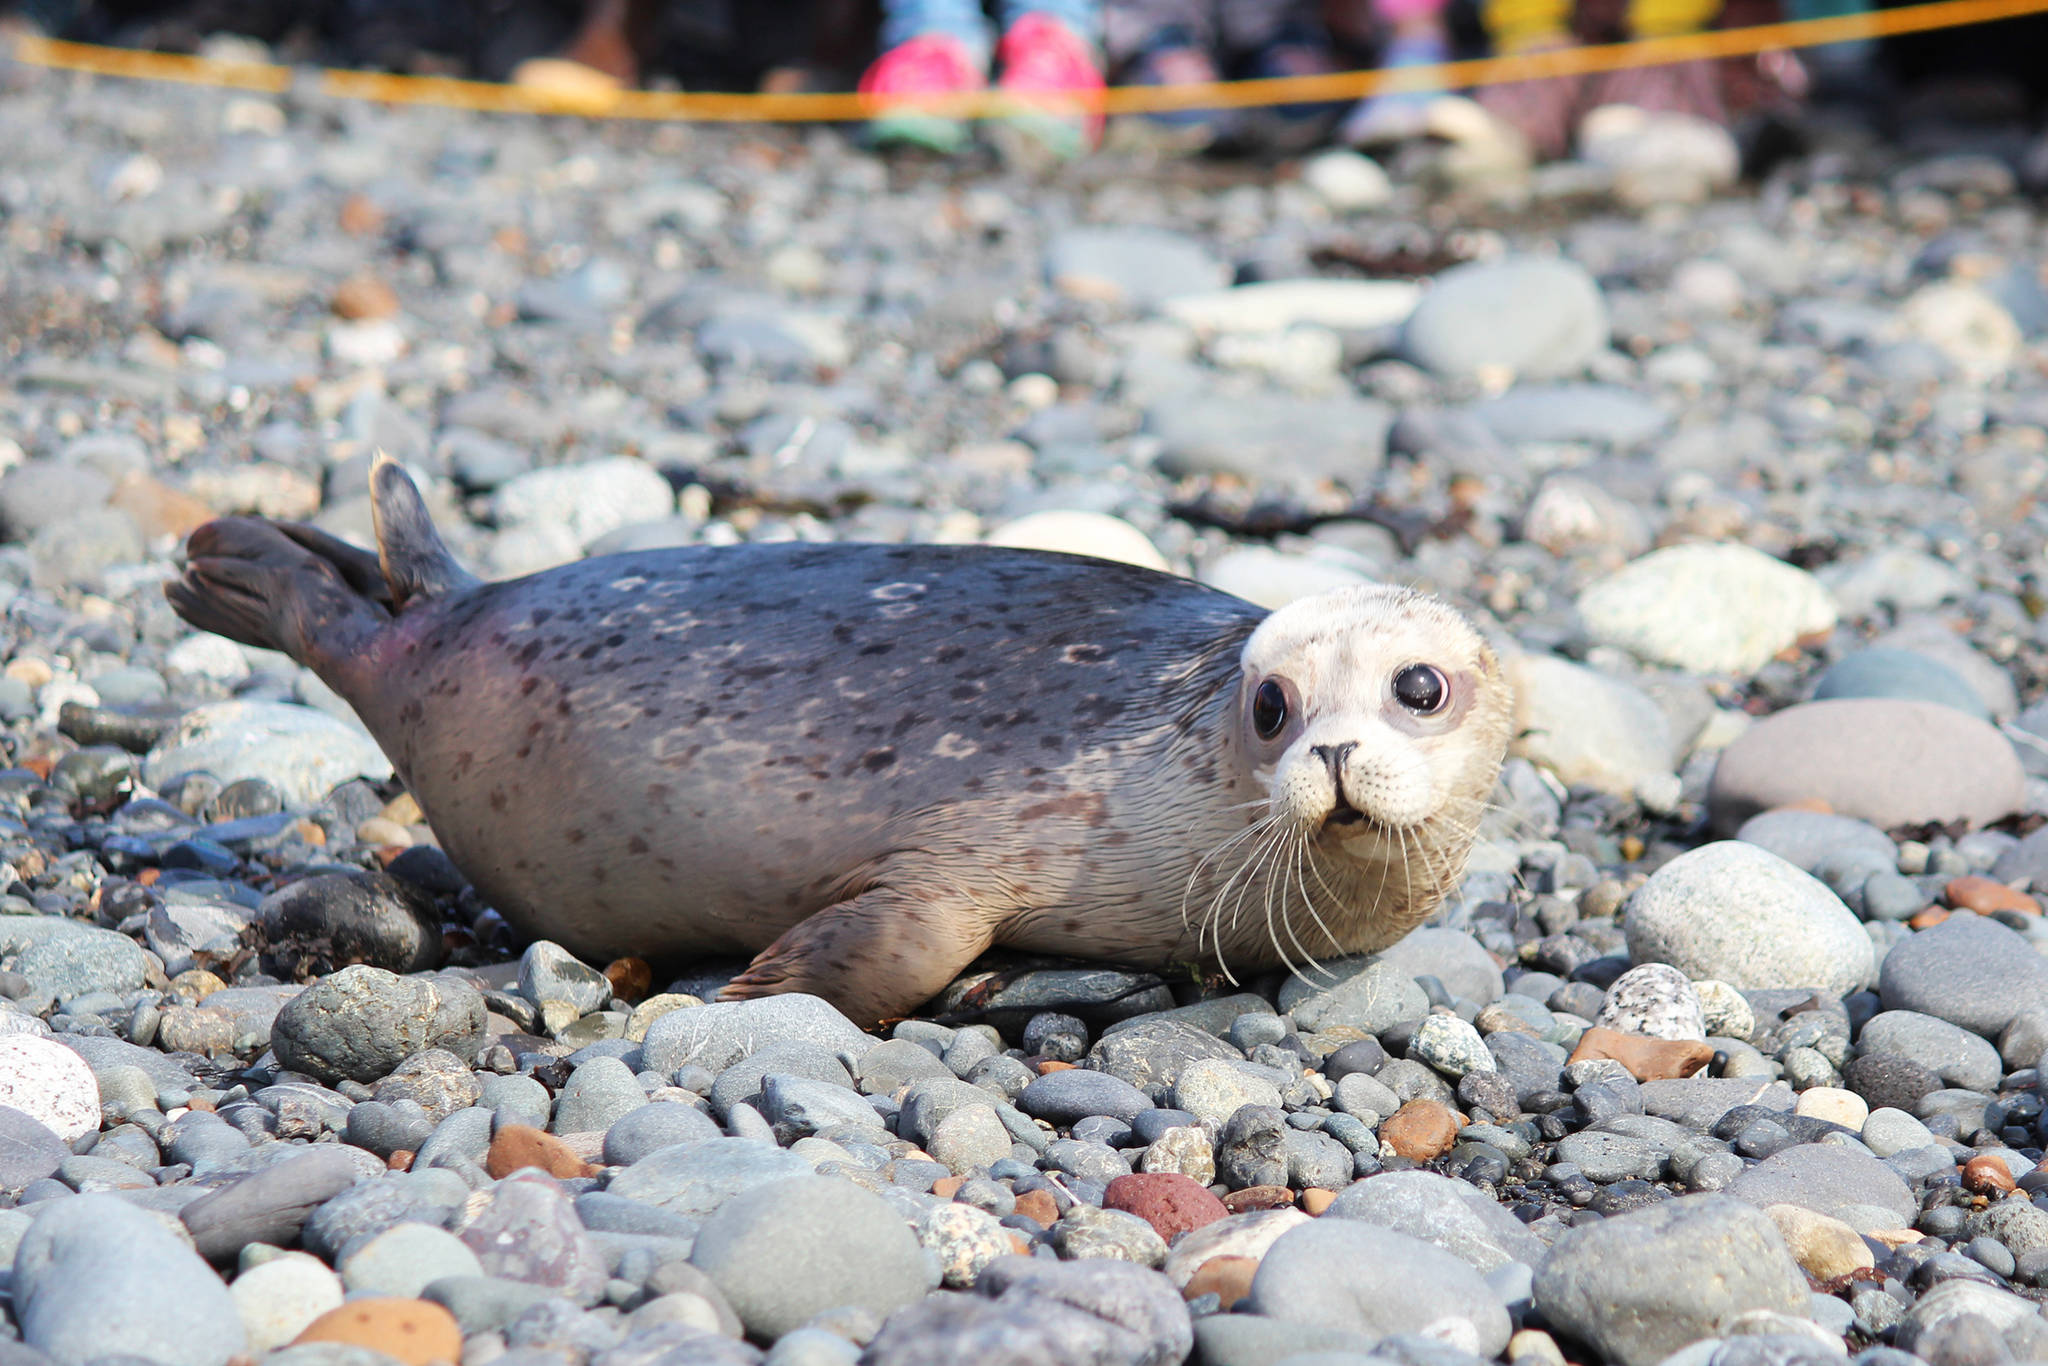 A harbor seal makes its way down to the waters of Kachemak Bay after being released back into the wild by the Alaska SeaLife Center on Thursday, Sept. 5, 2019 at Bishop’s Beach in Homer, Alaska. The center rehabilitated and released two harbor seals that were found neglected on Homer area beaches in Kachemak Bay this May. (Photo by Megan Pacer/Homer News)